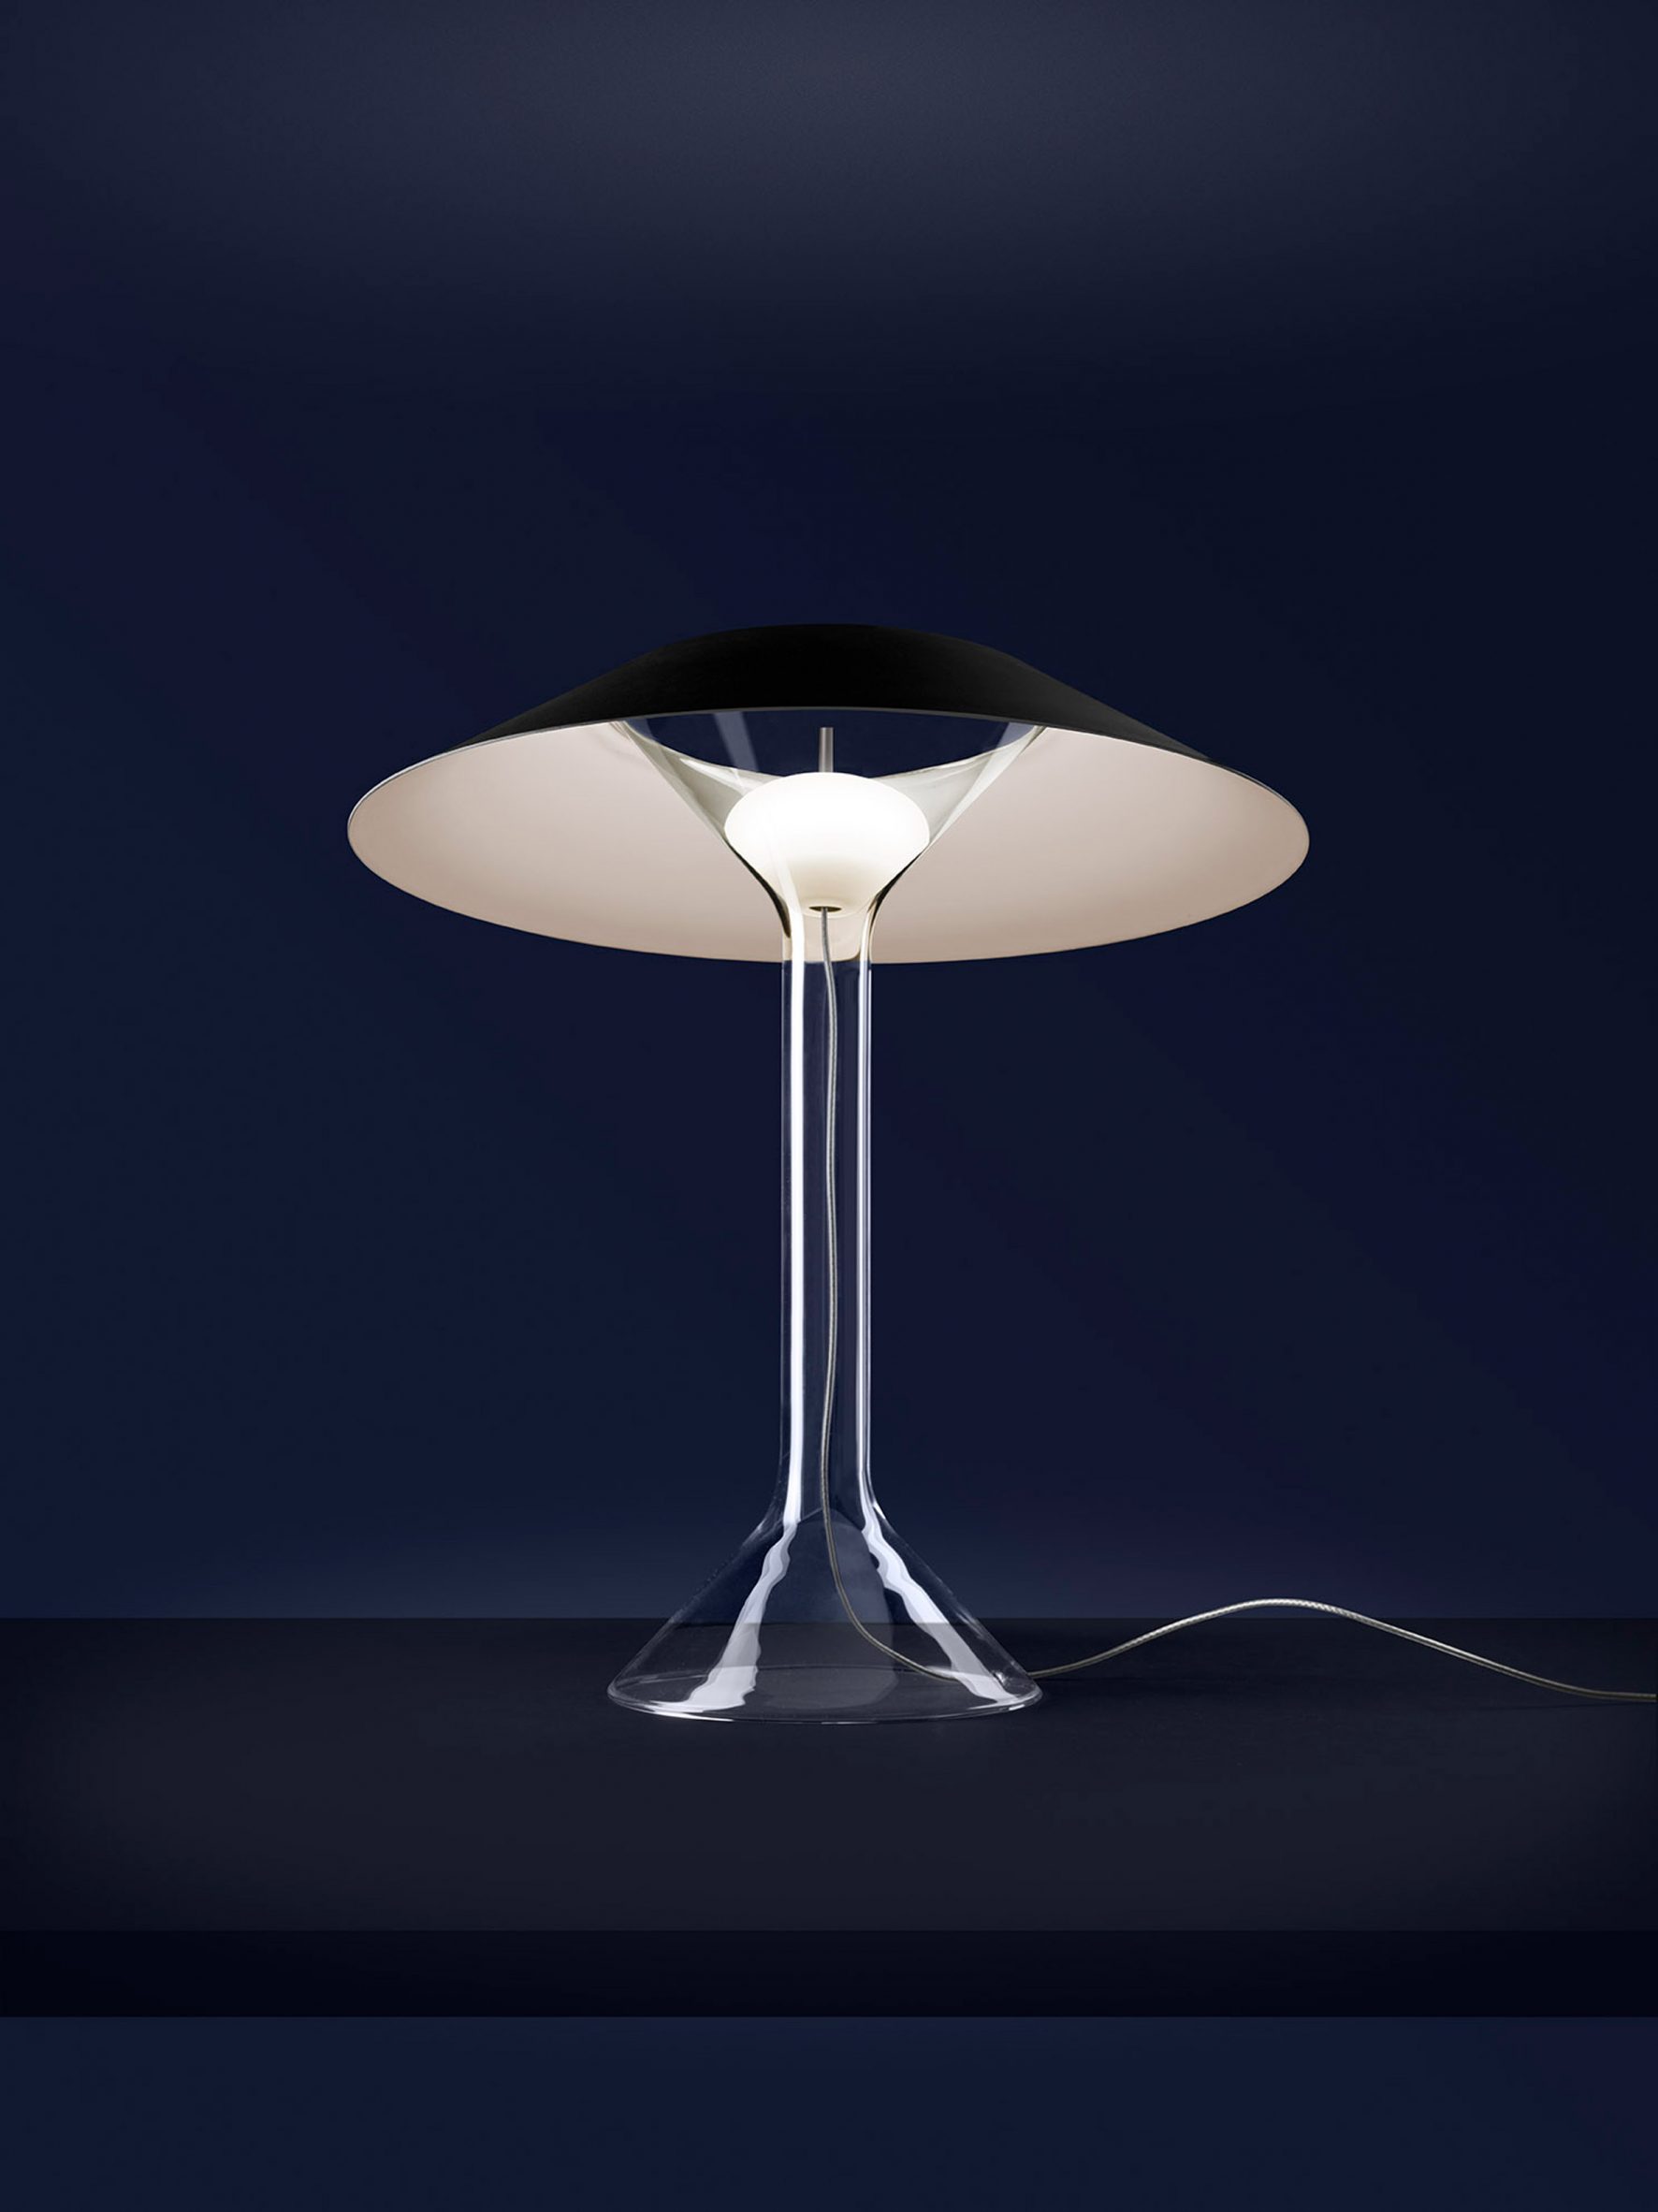 Chapeaux is a table lamp collection 